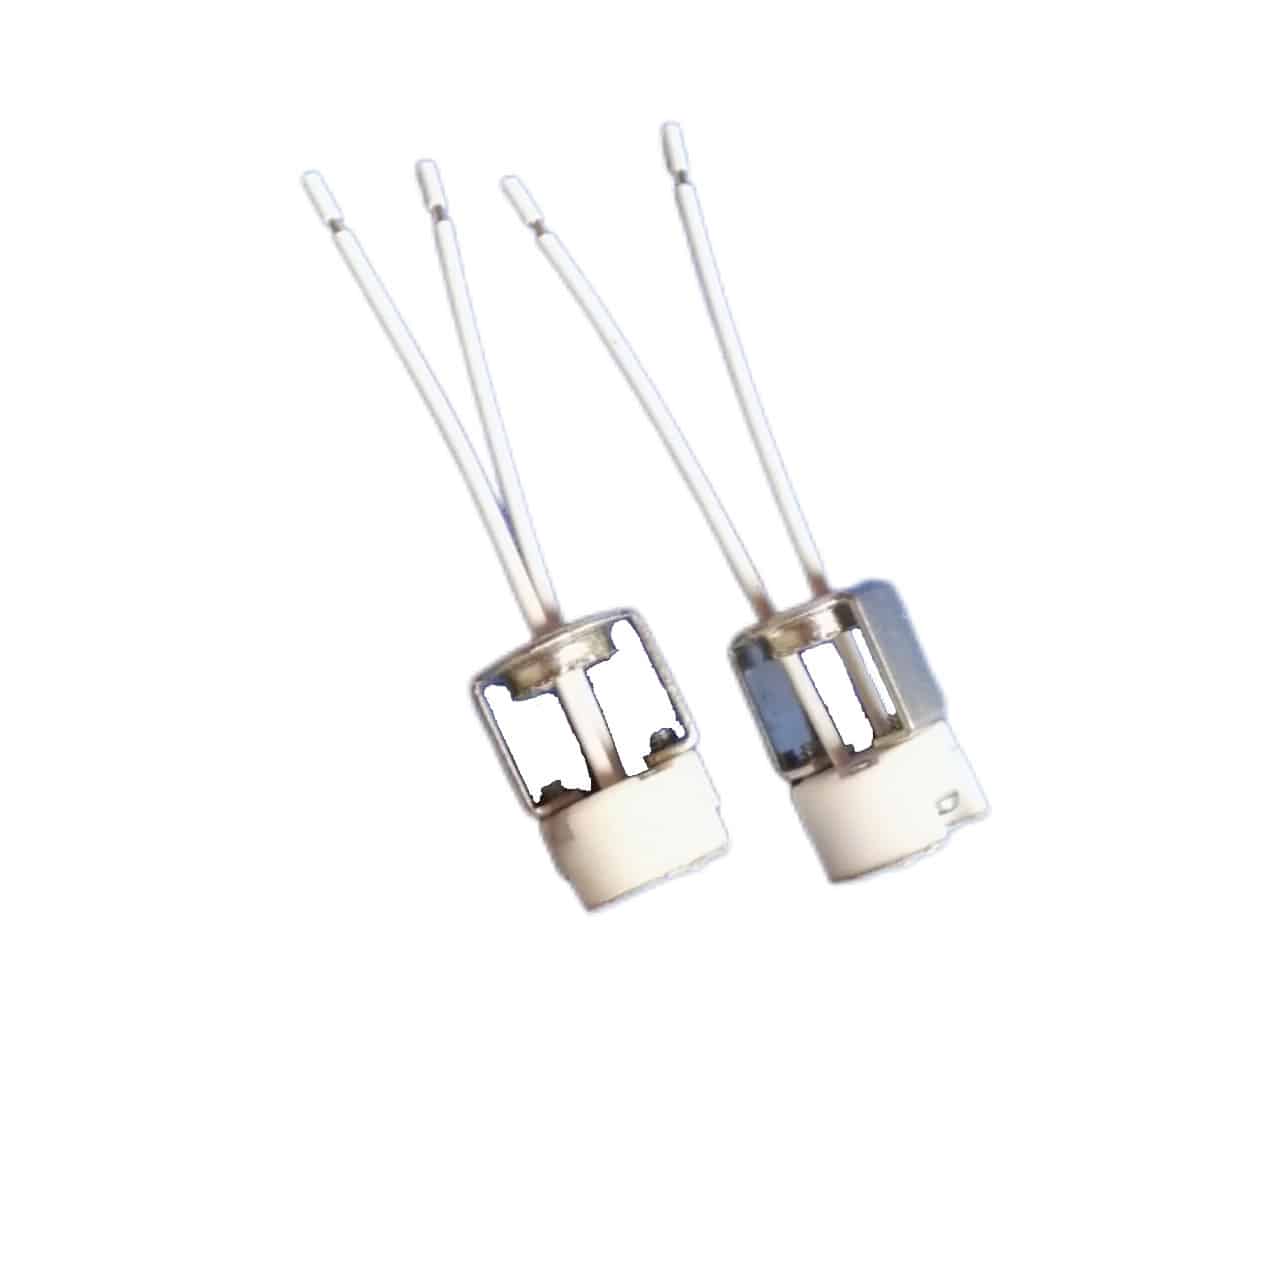 G5.3 Bi-Pin Base LED Halogen porcelain light sockets with metal mounting hickey and Teflon coated leads